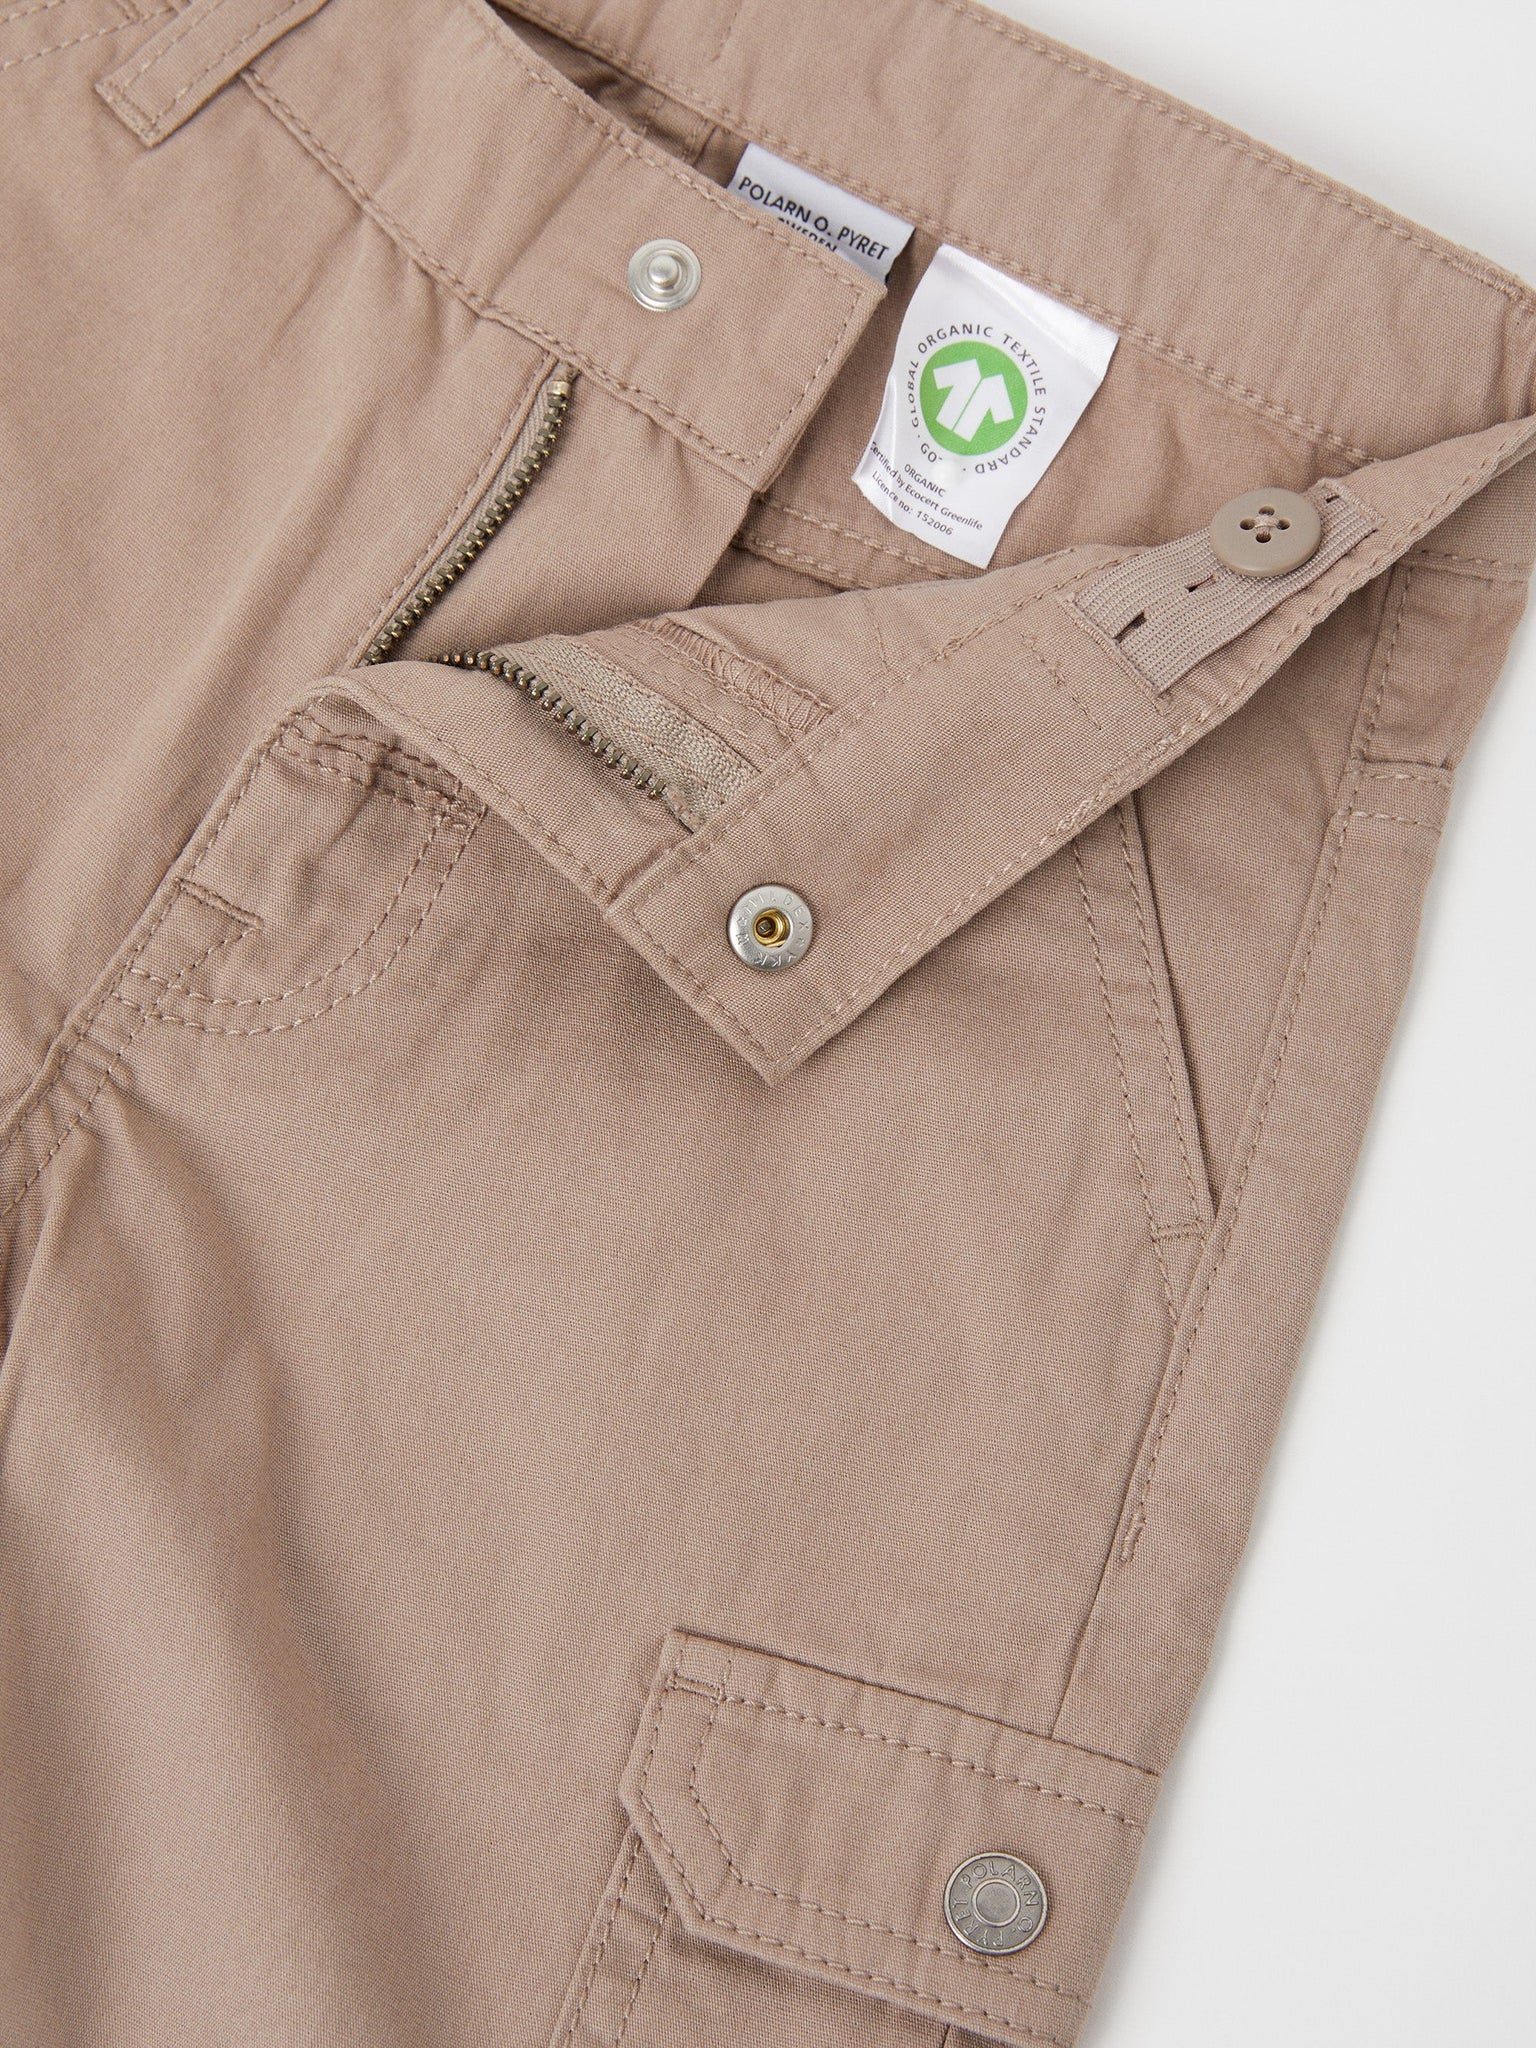 Organic Kids Cargo Shorts from the Polarn O. Pyret kidswear collection. Clothes made using sustainably sourced materials.